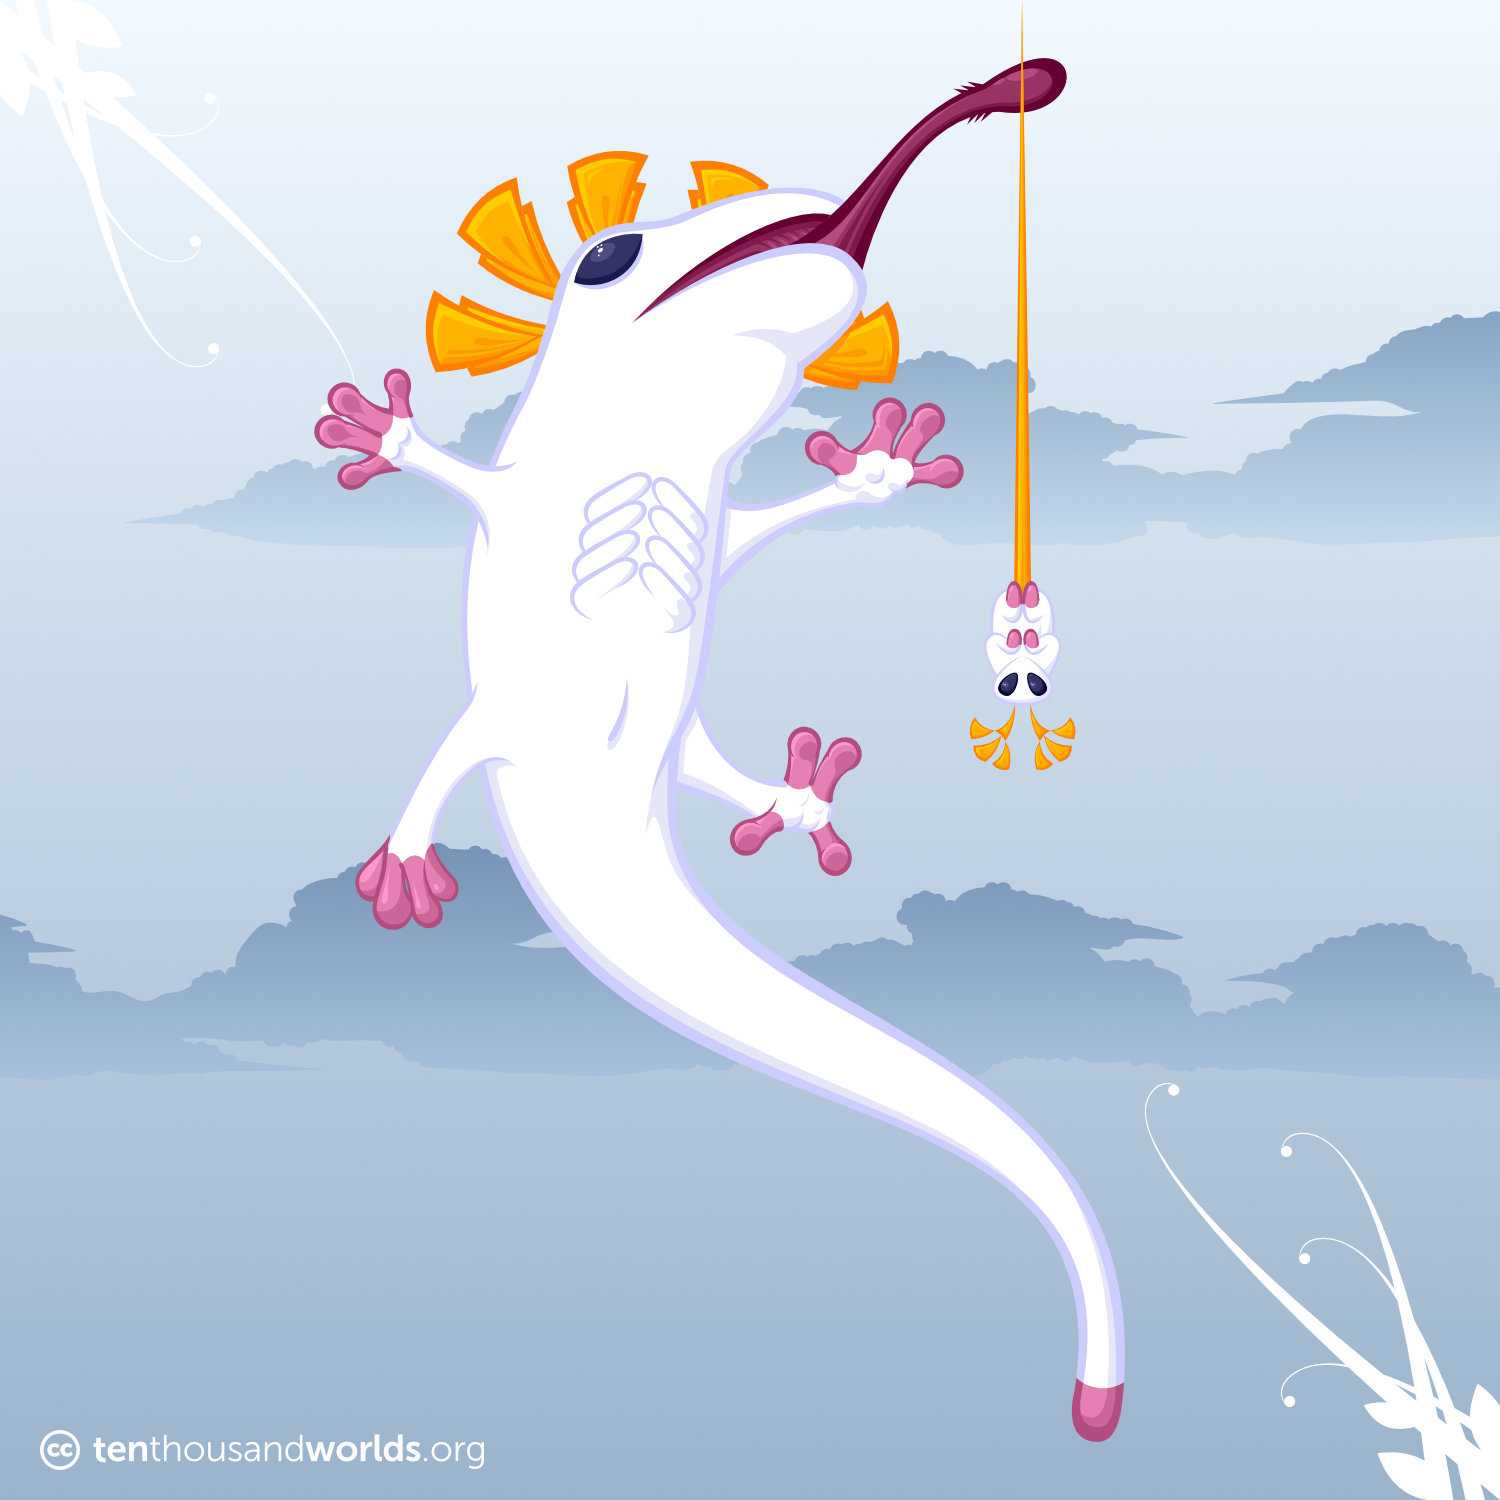 A flying white salamander-like creature shoots out a long, crimson, barbed frog-like tongue. It has prominent rib-like structures, pink digits, and is wreathed in a headdress of floating golden triangles. A tiny, grub-like creature with similar coloring and antennae made of golden triangles, floats upside-down by a gold tread.